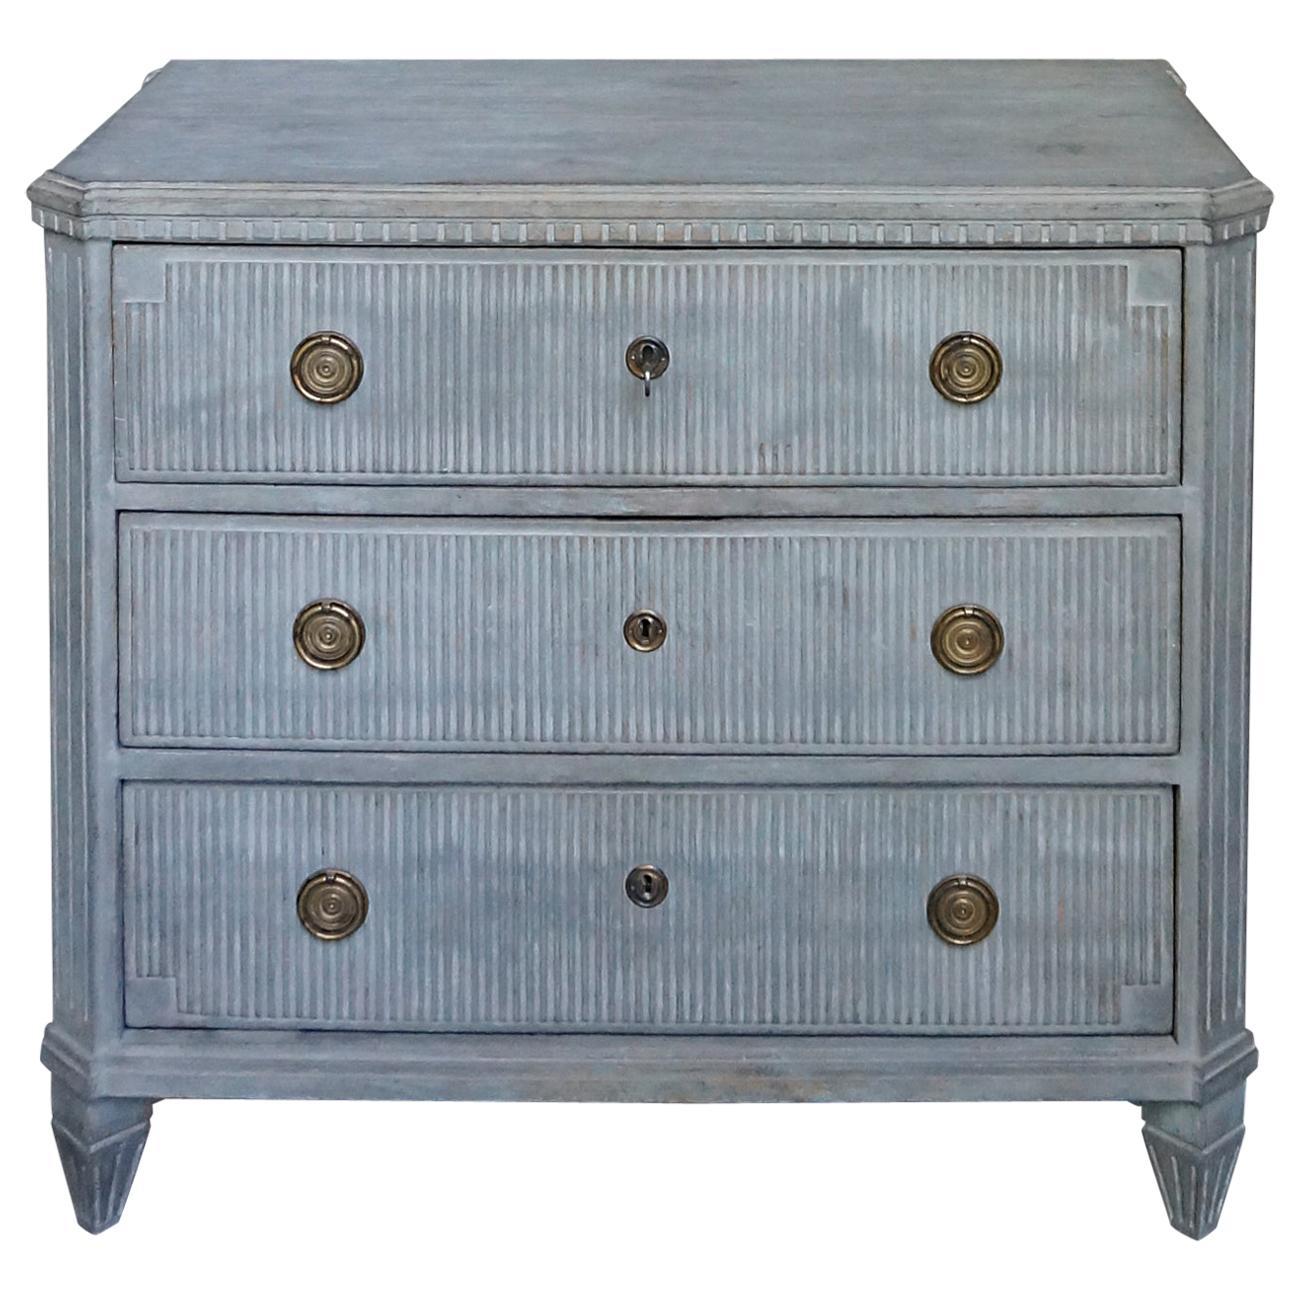 Reeded Chest of Drawers in the Neoclassical Style